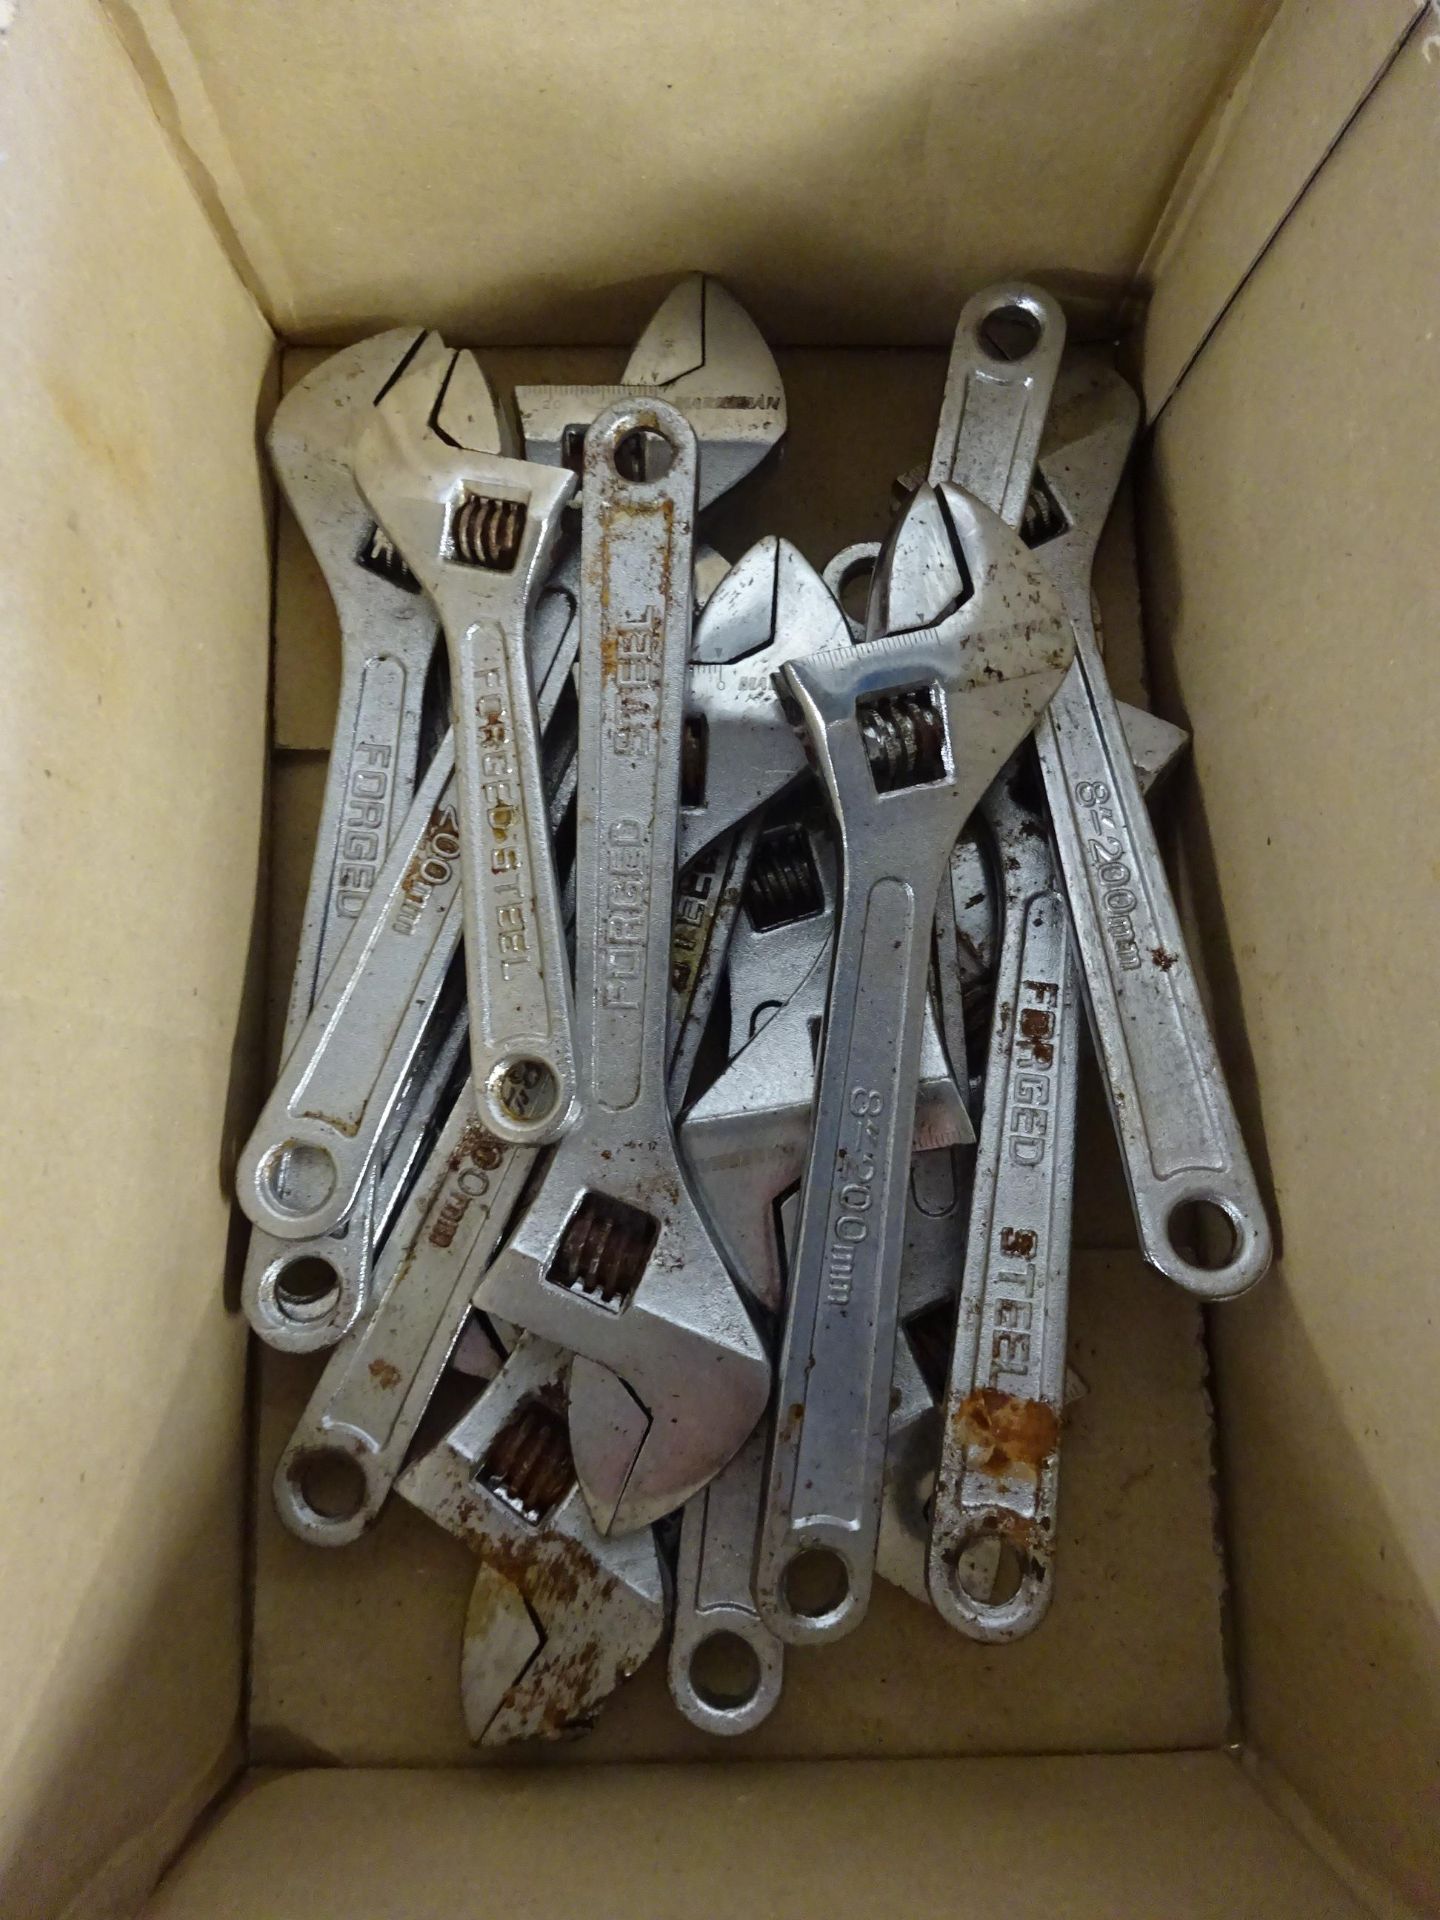 BOX OF 15 8IN ADJUSTABLE SPANNERS (SLIGHTY RUSTY)